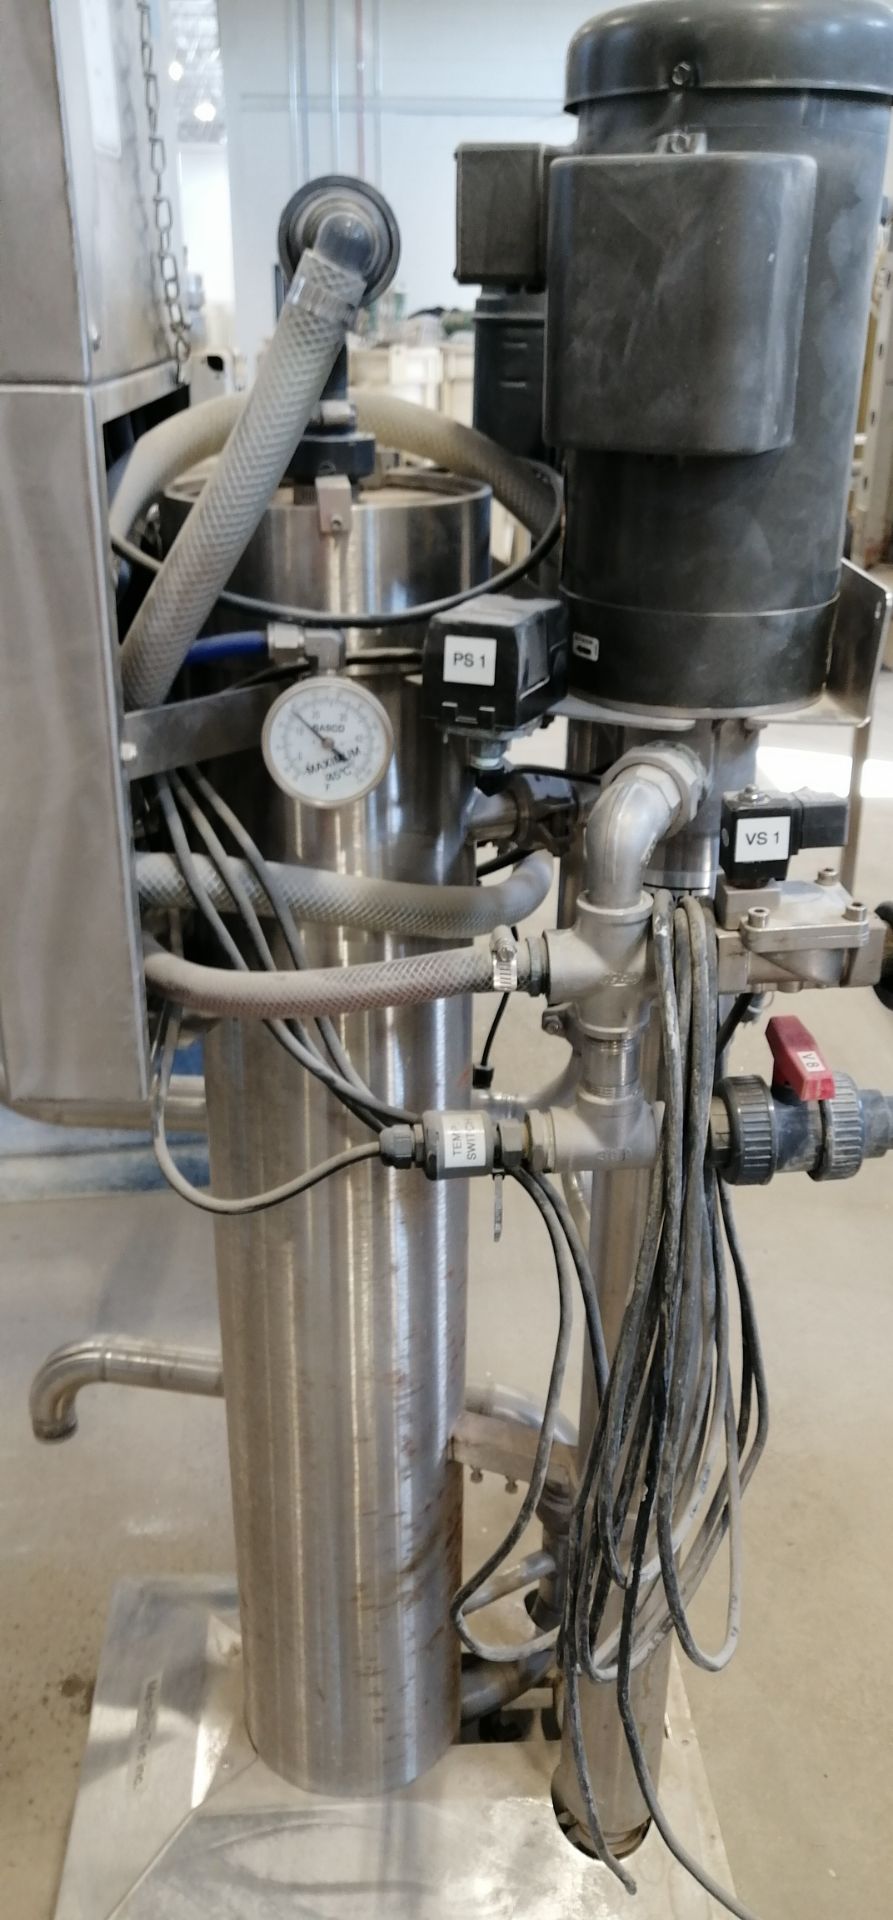 MemPro Series Stainless Steel Reverse osmosis or nanofiltration system Model:285-ROLP - Image 7 of 13